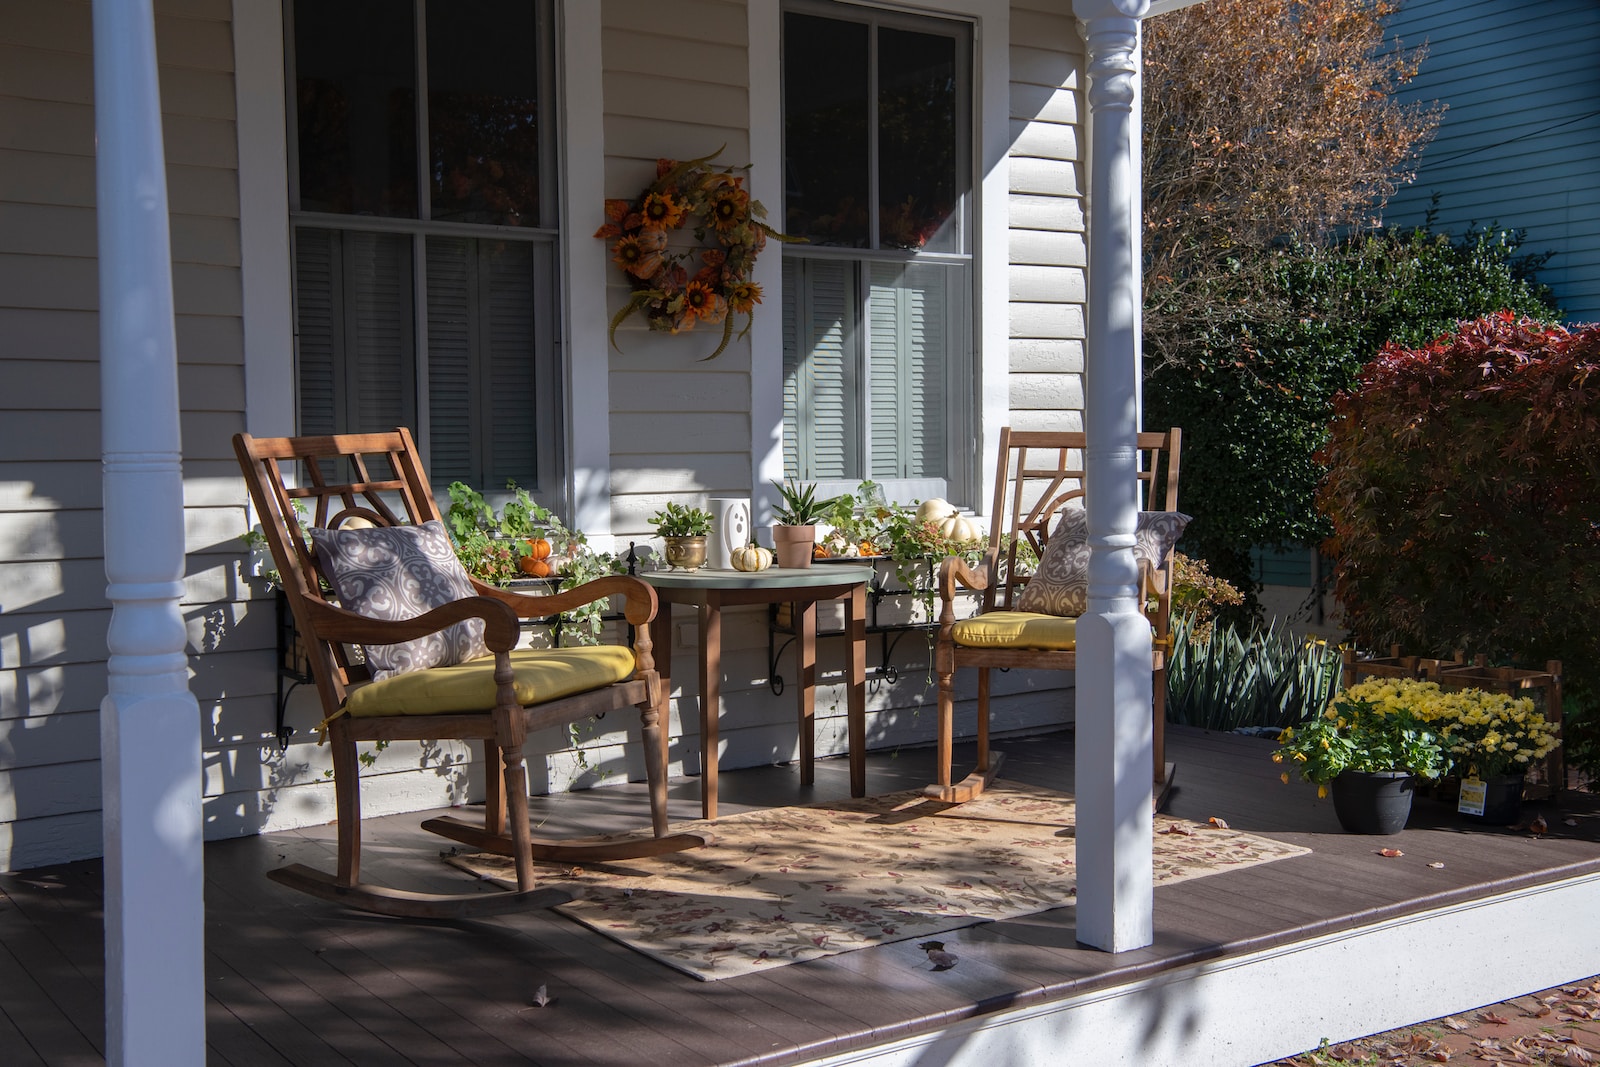 FAQs about how to install decorative porch columns